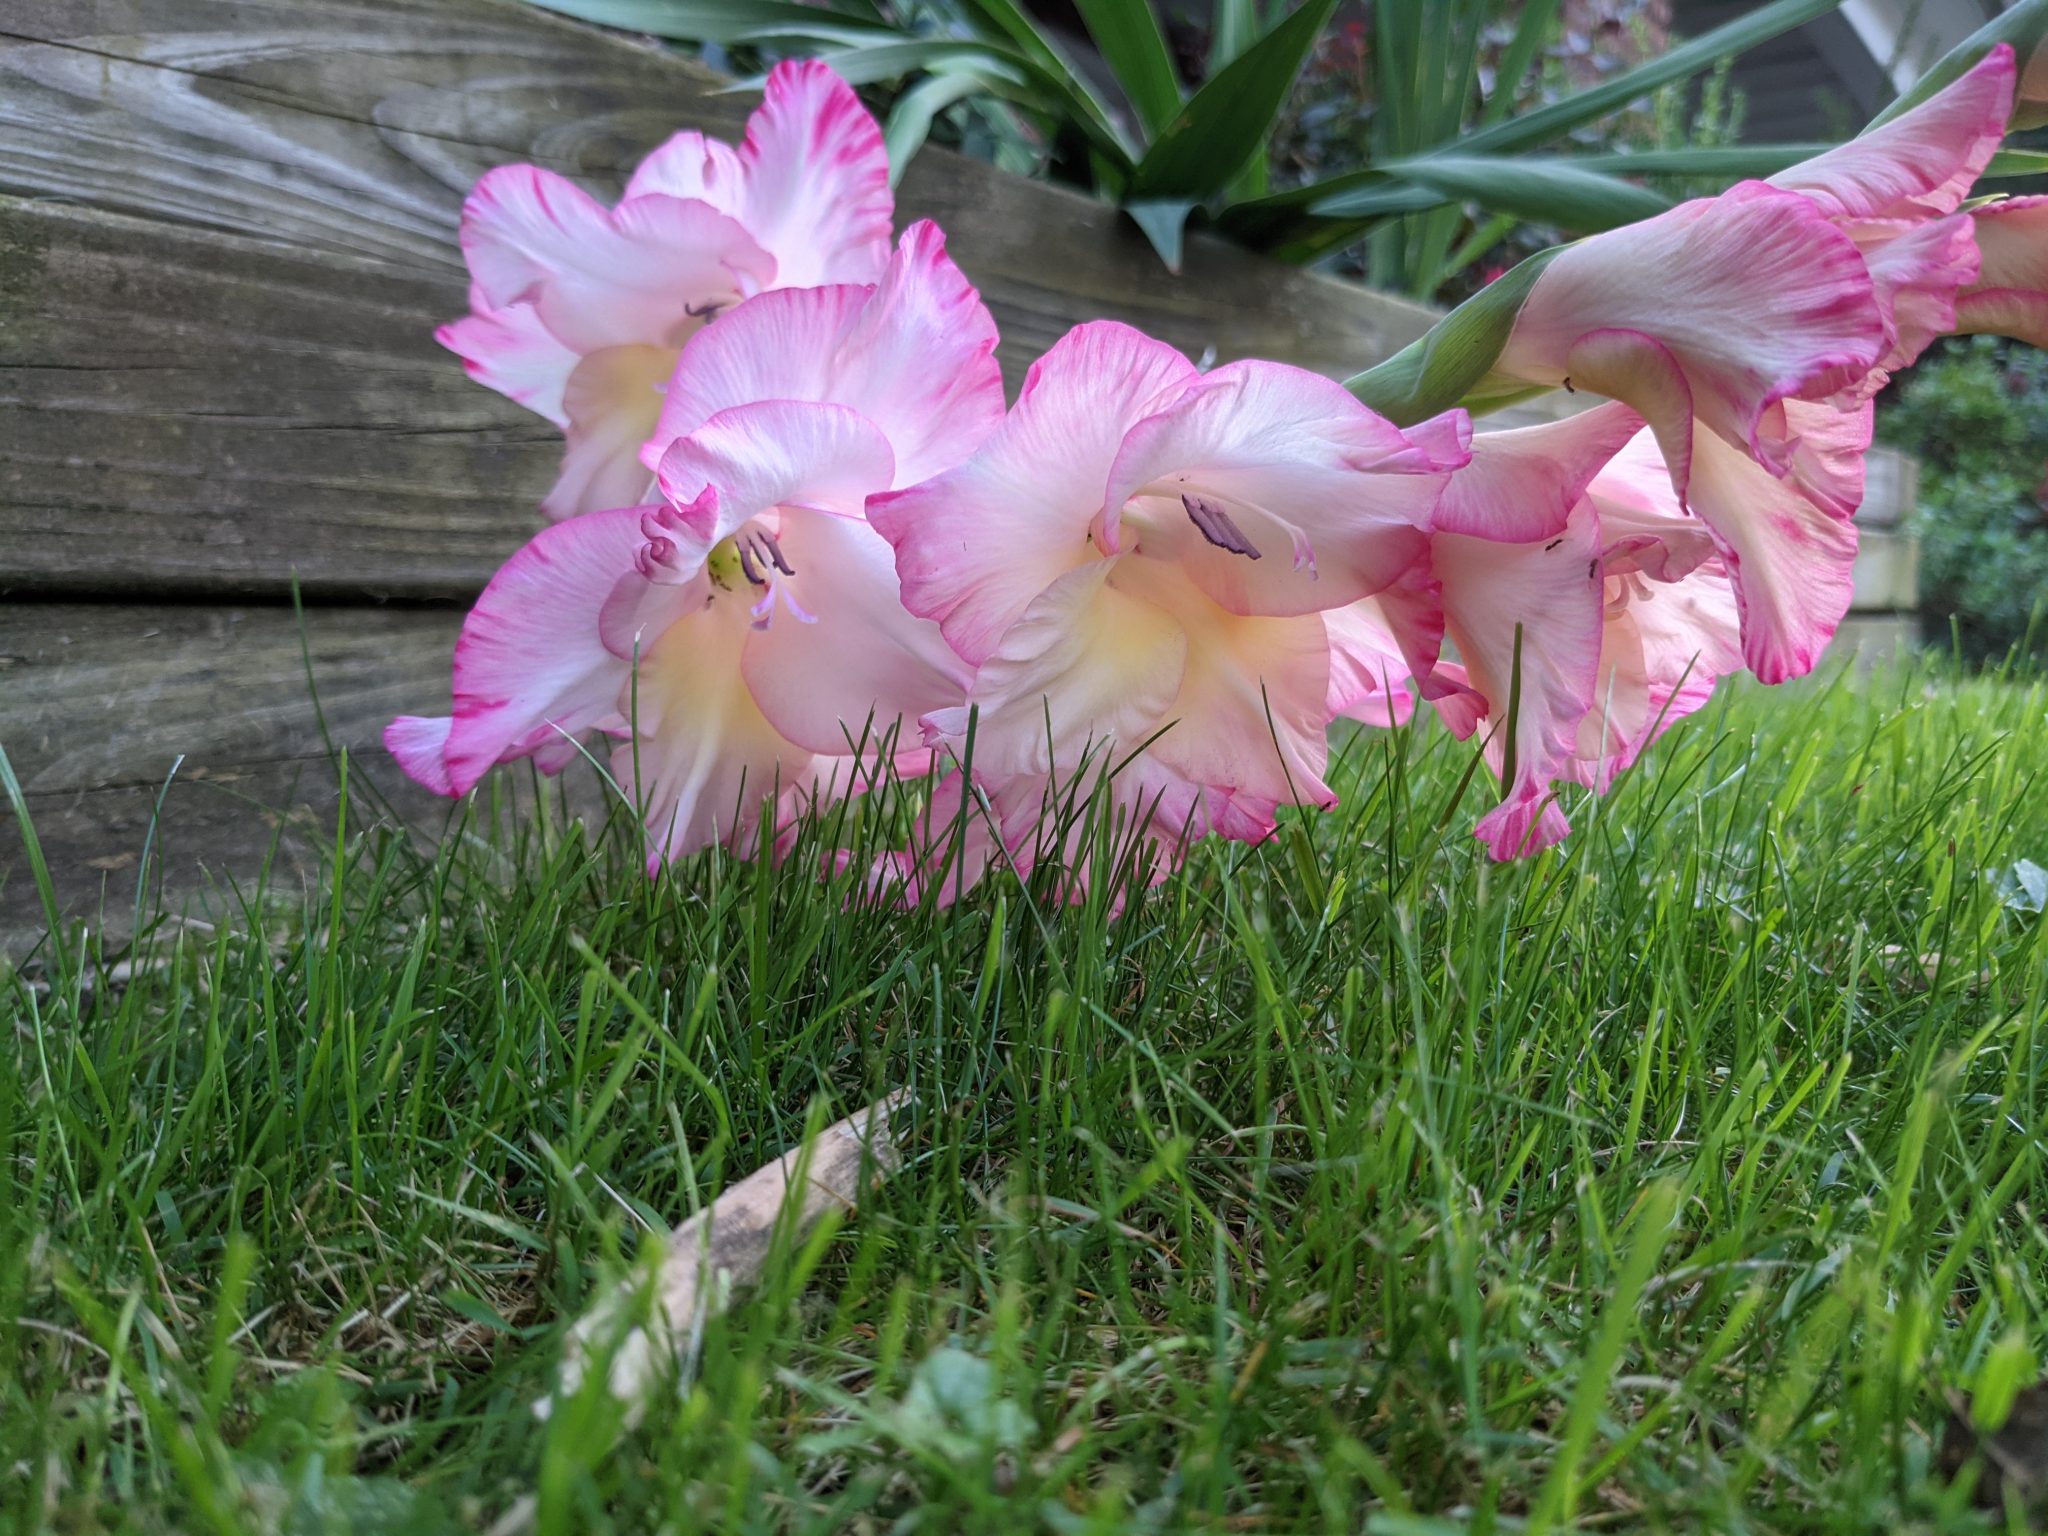 Two pink flowers, above green grass